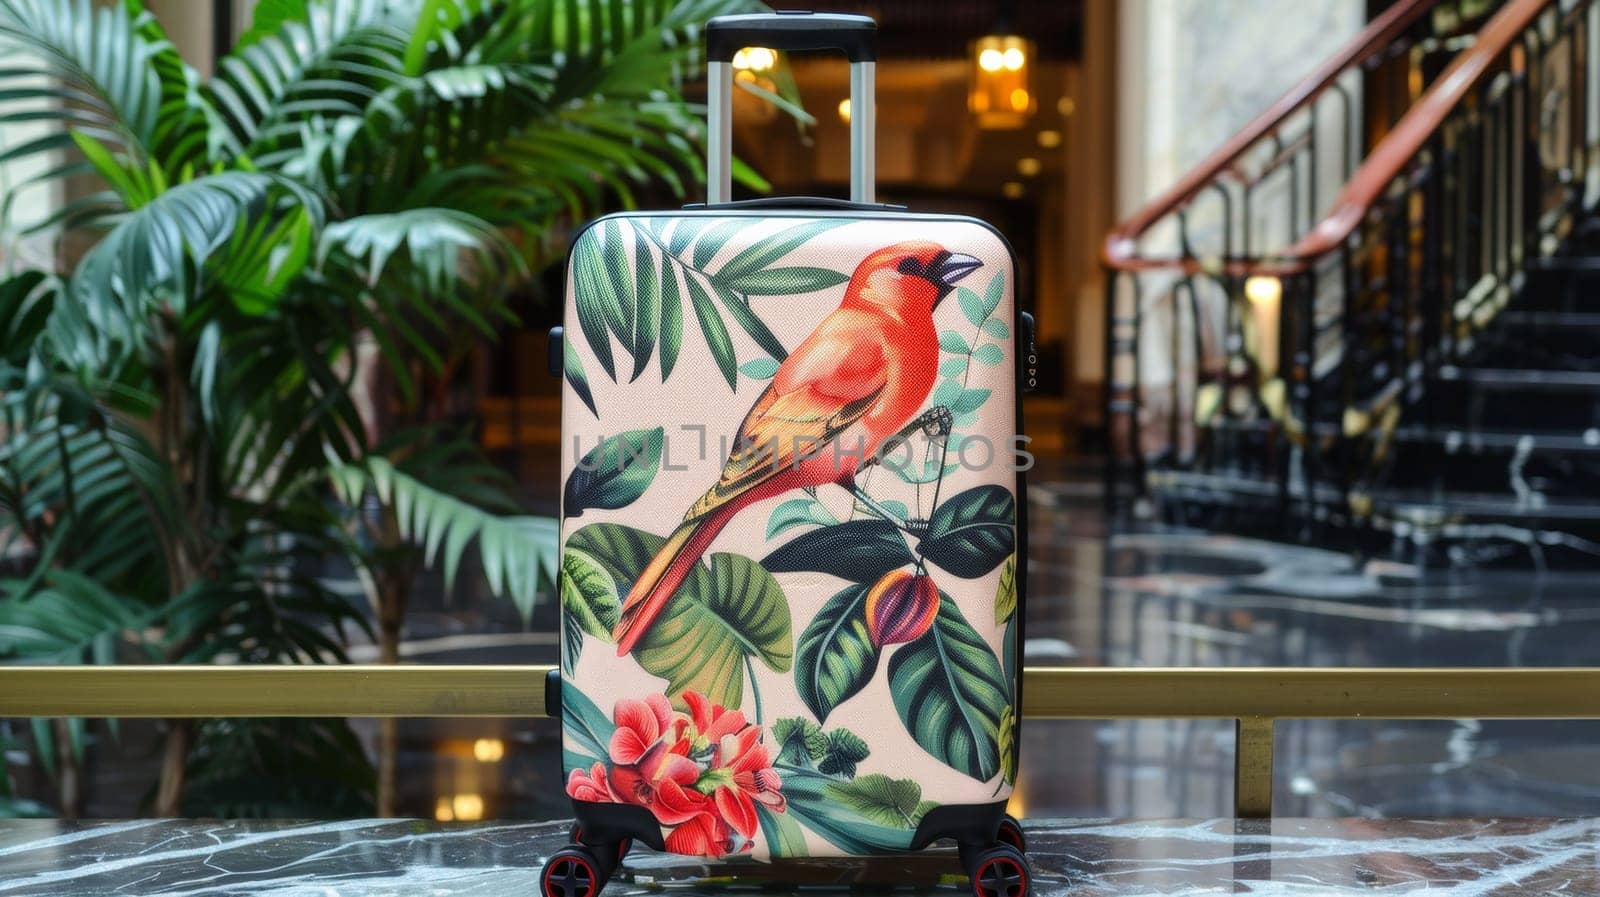 A colorful suitcase with a bird on it sitting in front of some plants, AI by starush